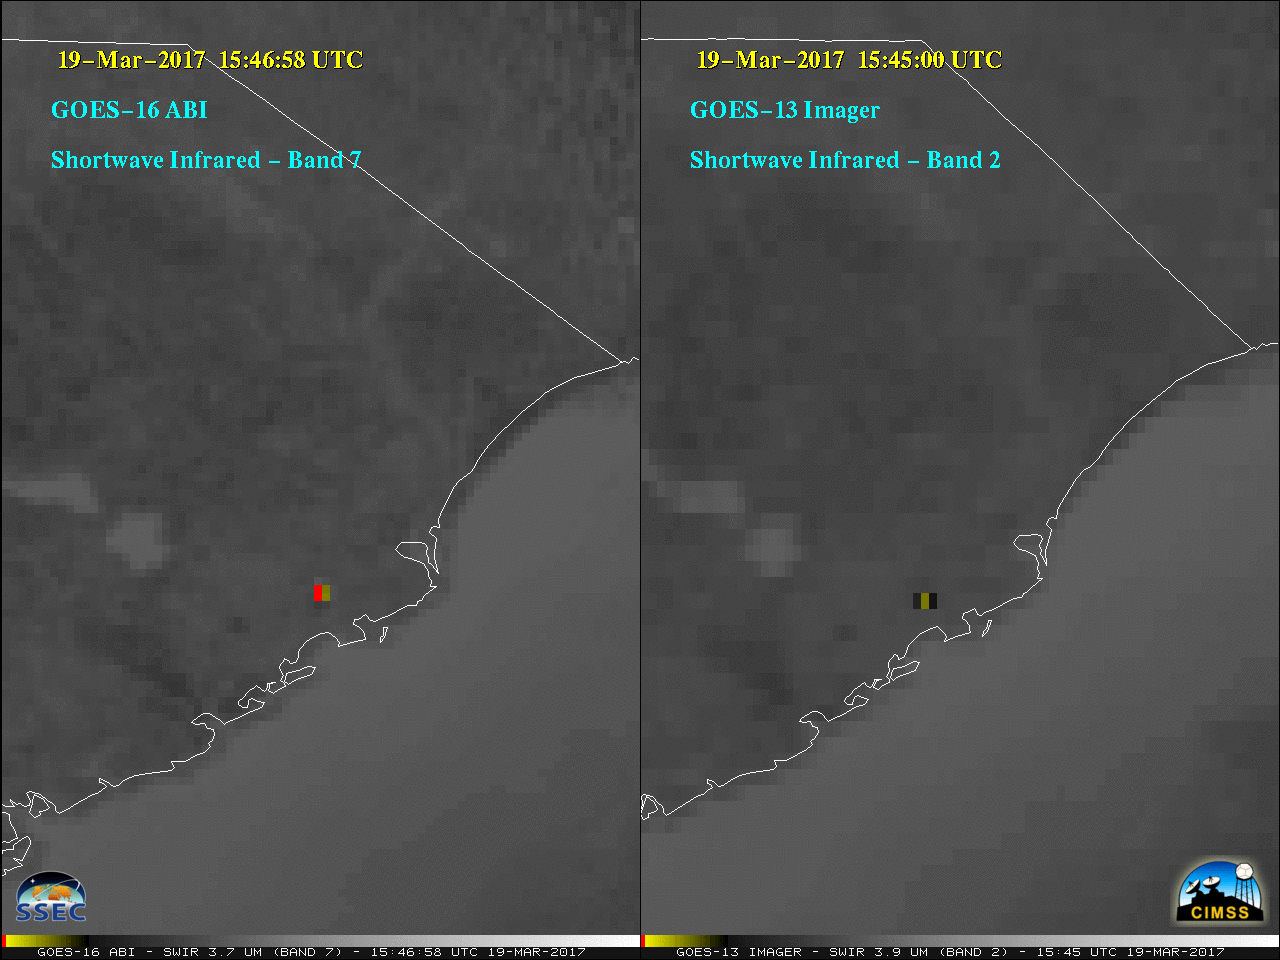 GOES-16 Shortwave Infrared (3.9 µm, left) and GOES-13 Shortwave Infrared (3.9 µm, right) images [click to play MP4 animation]